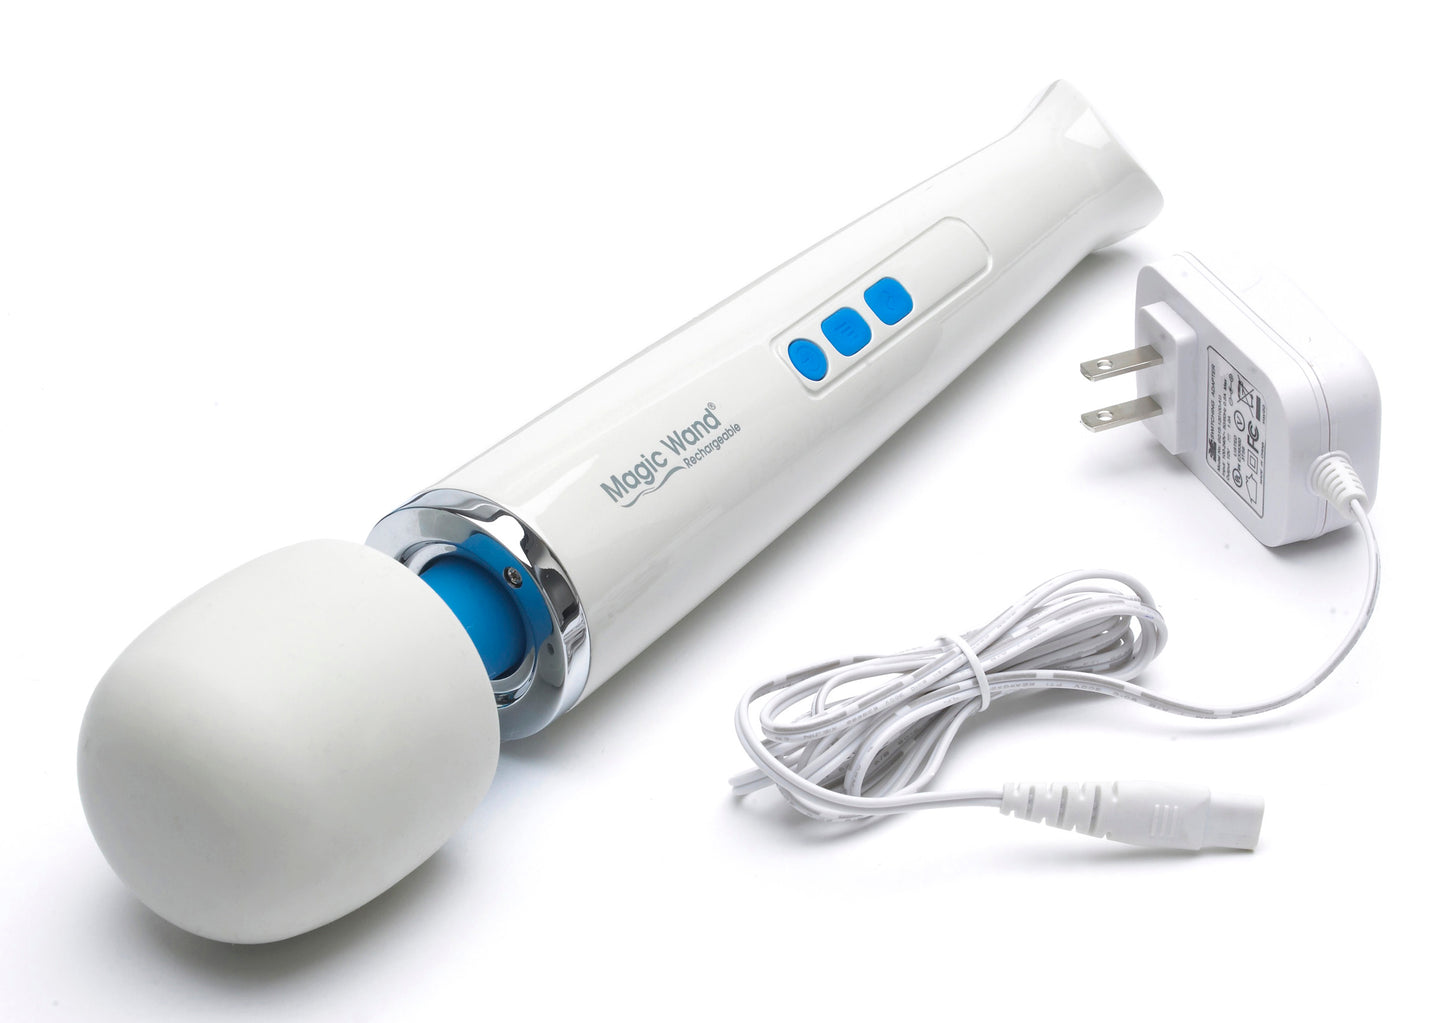 Magic Wand Rechargeable Personal Massager - UABDSM